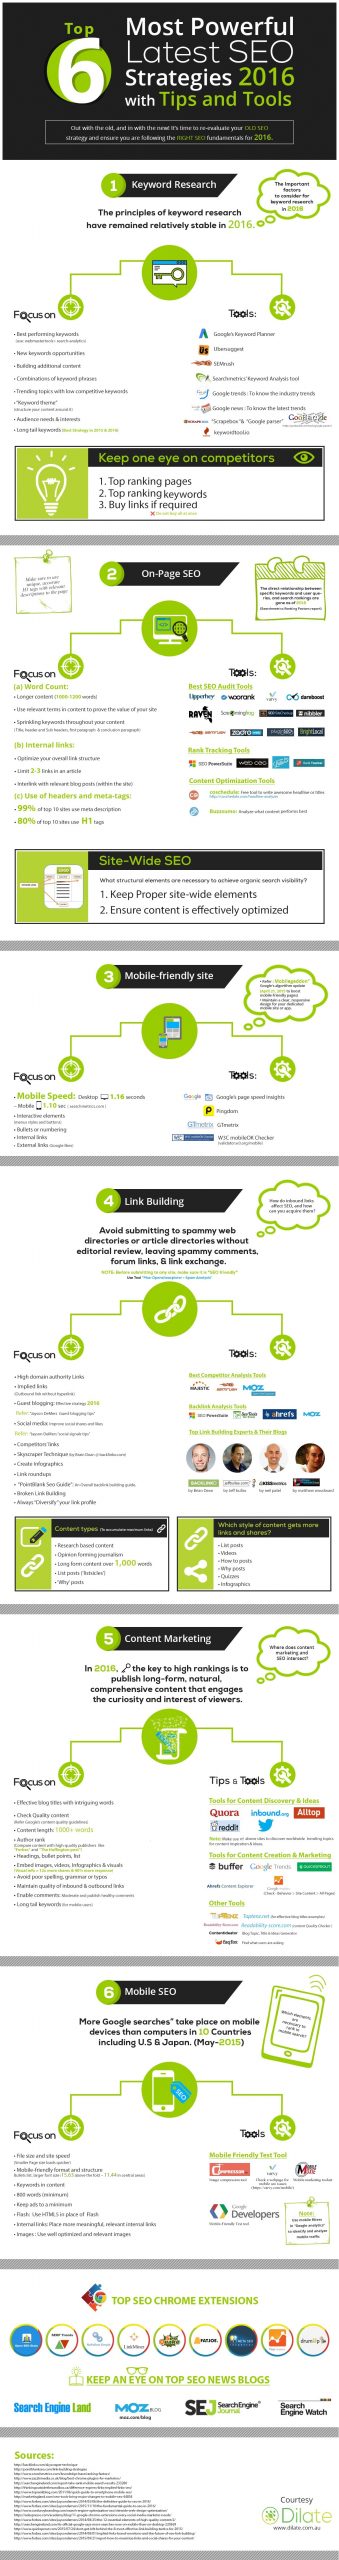 Top 6 Most Powerful Latest SEO Strategies 2016 with Tips & Tools infographic